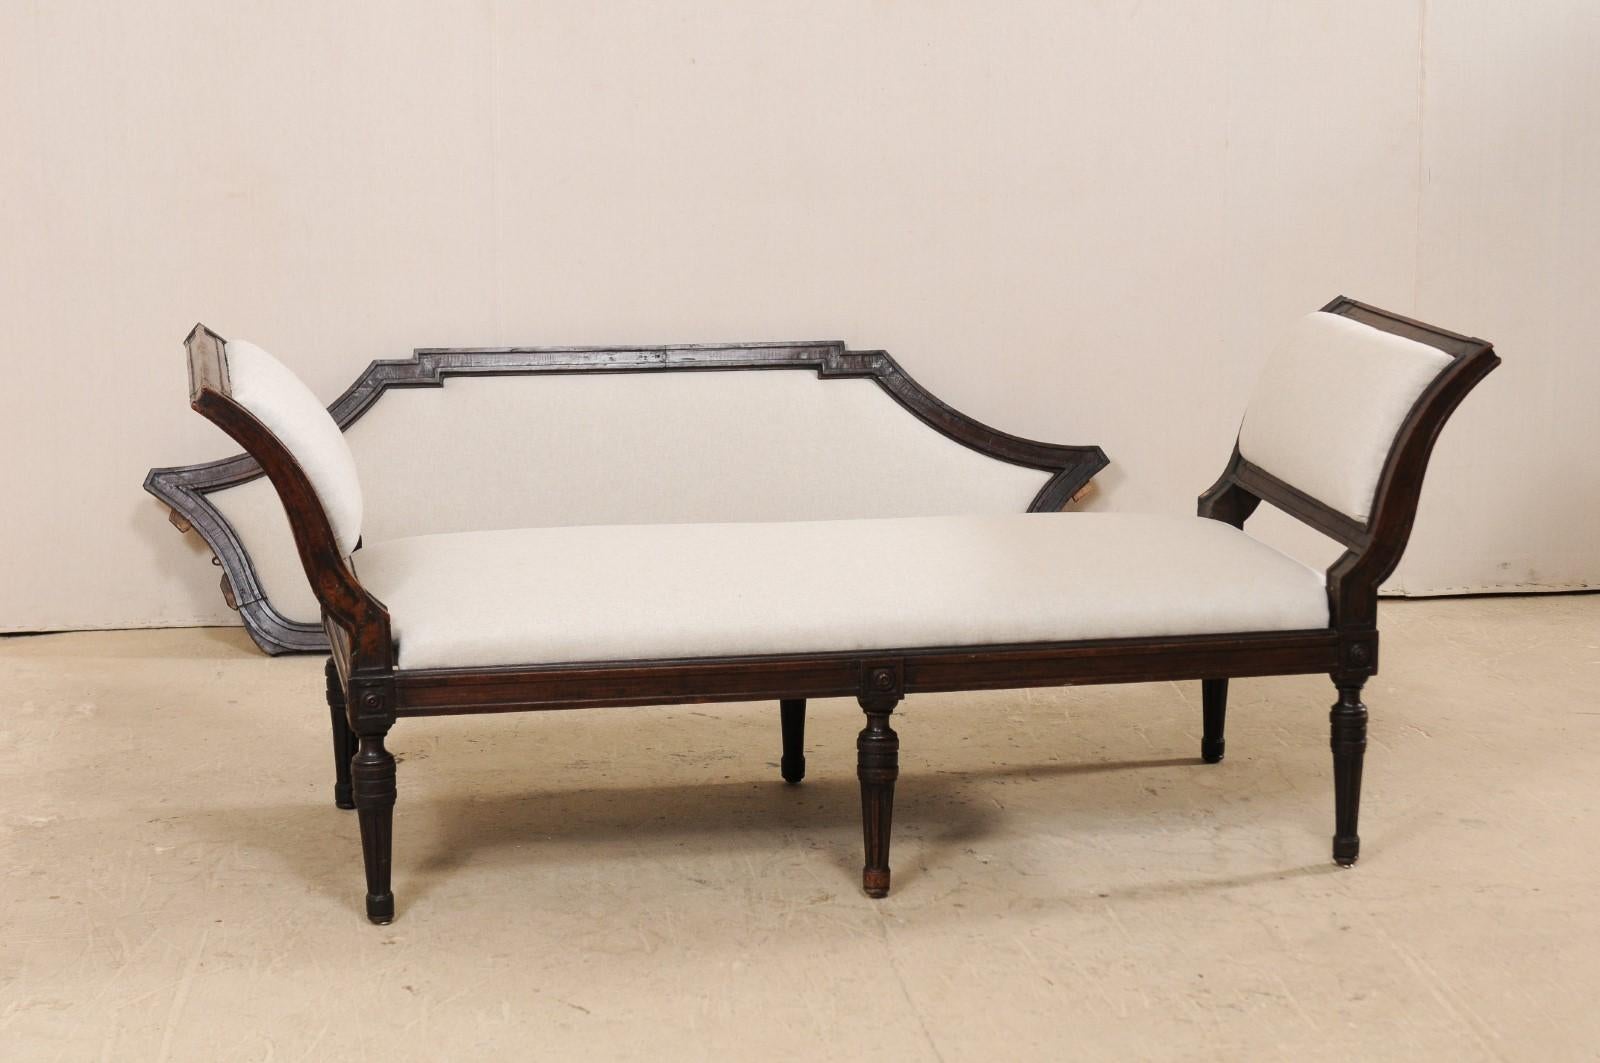 18th Century Italian Venetian Sofa with Removable Back, Converts to a Bench For Sale 3